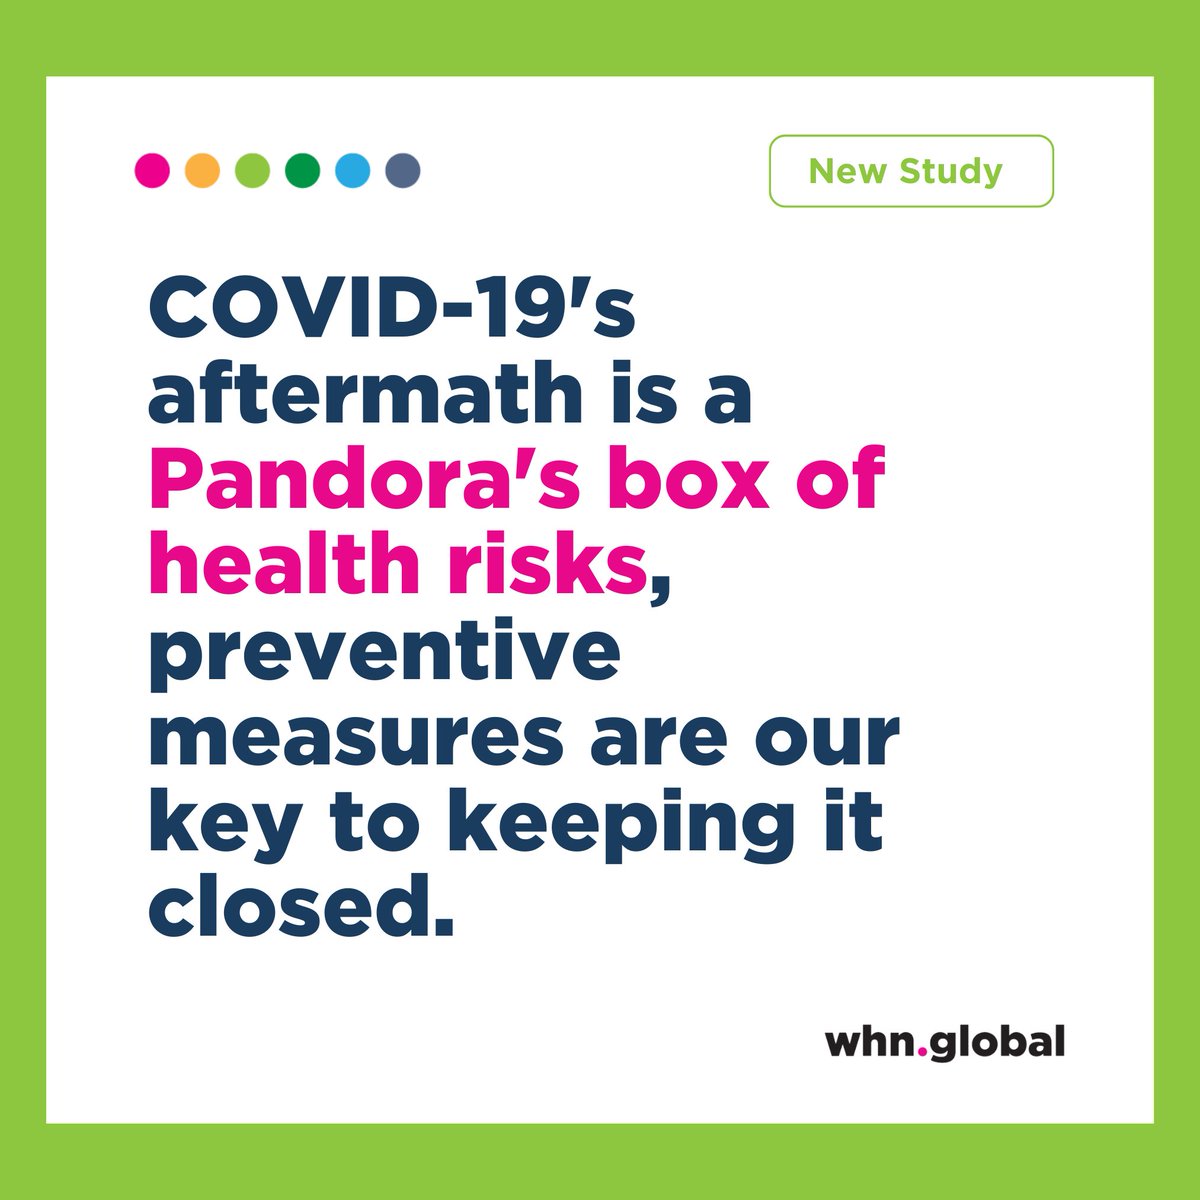 The long-term impacts of #COVID19 go beyond the initial recovery. Research shows increased risks of subsequent infections. The numbers are concerning, with some infections seeing up to a 4.4x increase. Read the full study → whn.global/scientific/inc…